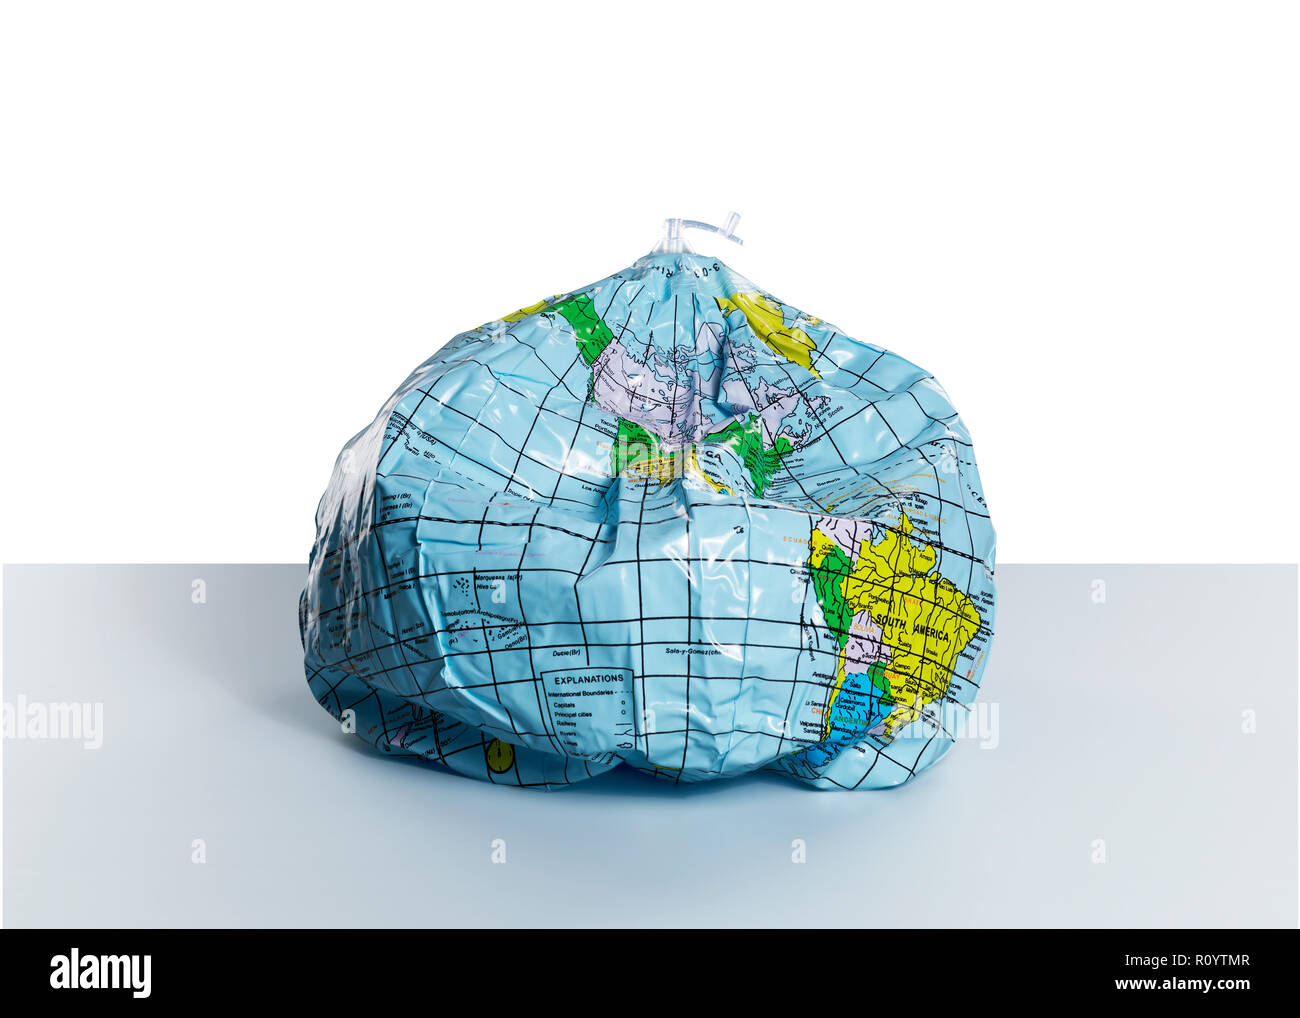 Deflating inflatable globe showing the Americas, still life Stock Photo